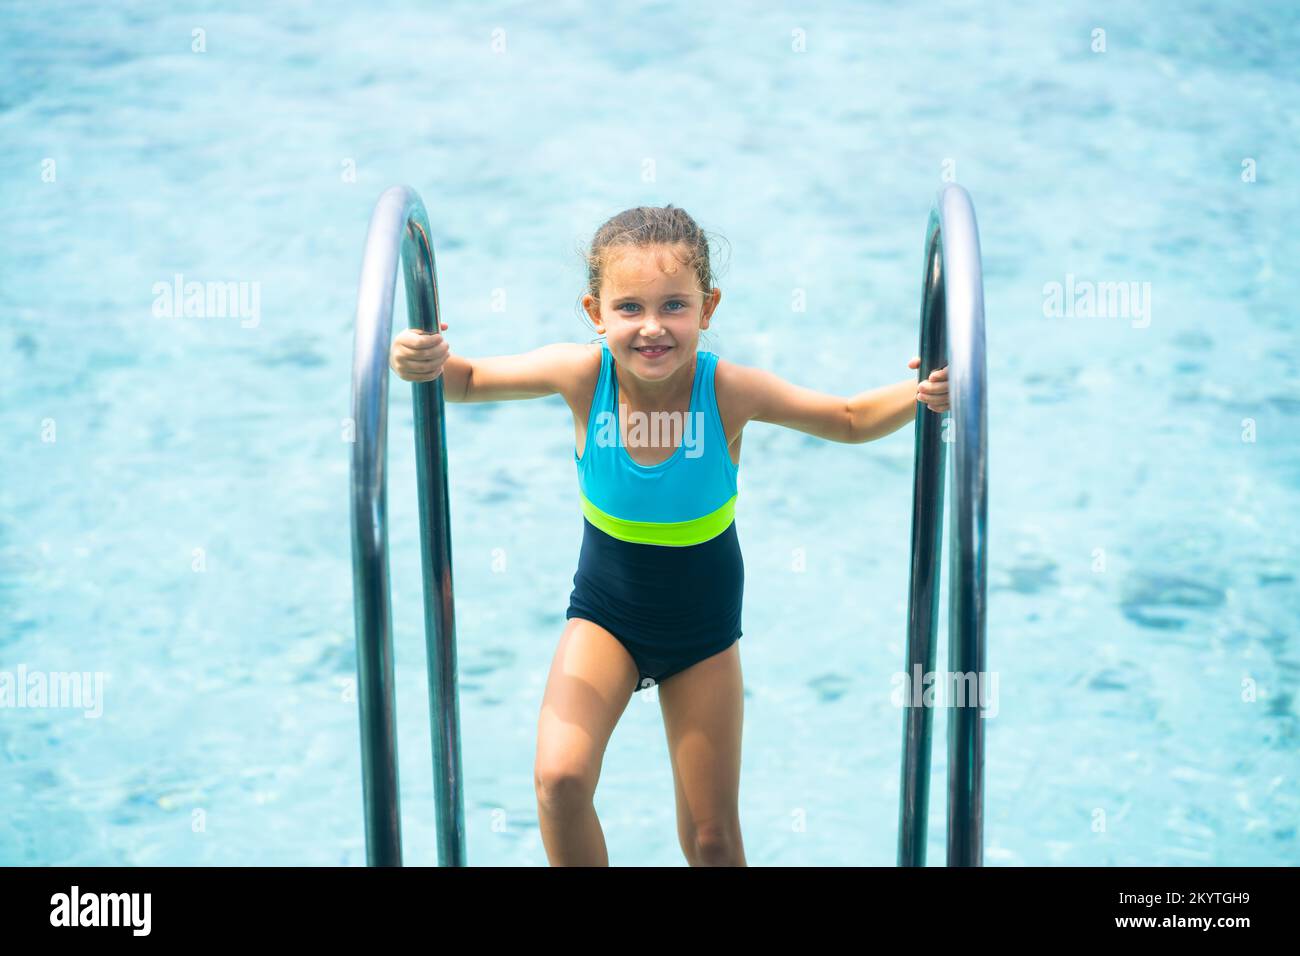 Tropical Travel And Swimming Sport. Ladder In Water Stock Photo